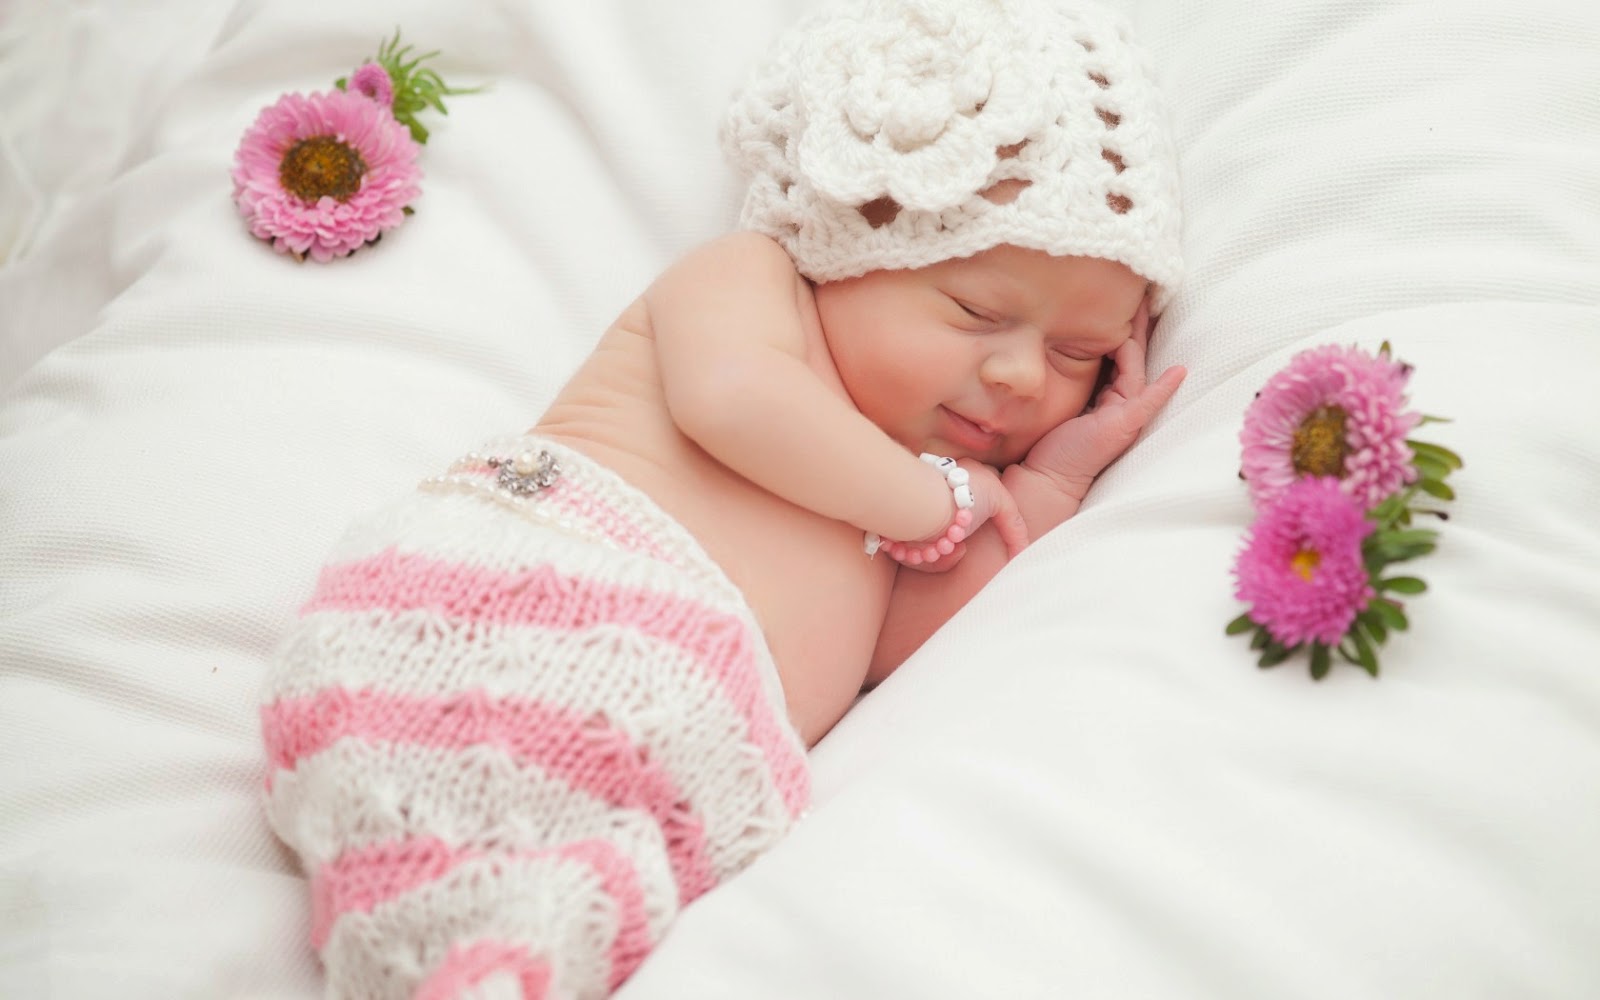 Cute Baby Sleeping Image HD Photos Wallpaper Pictures Pixhome